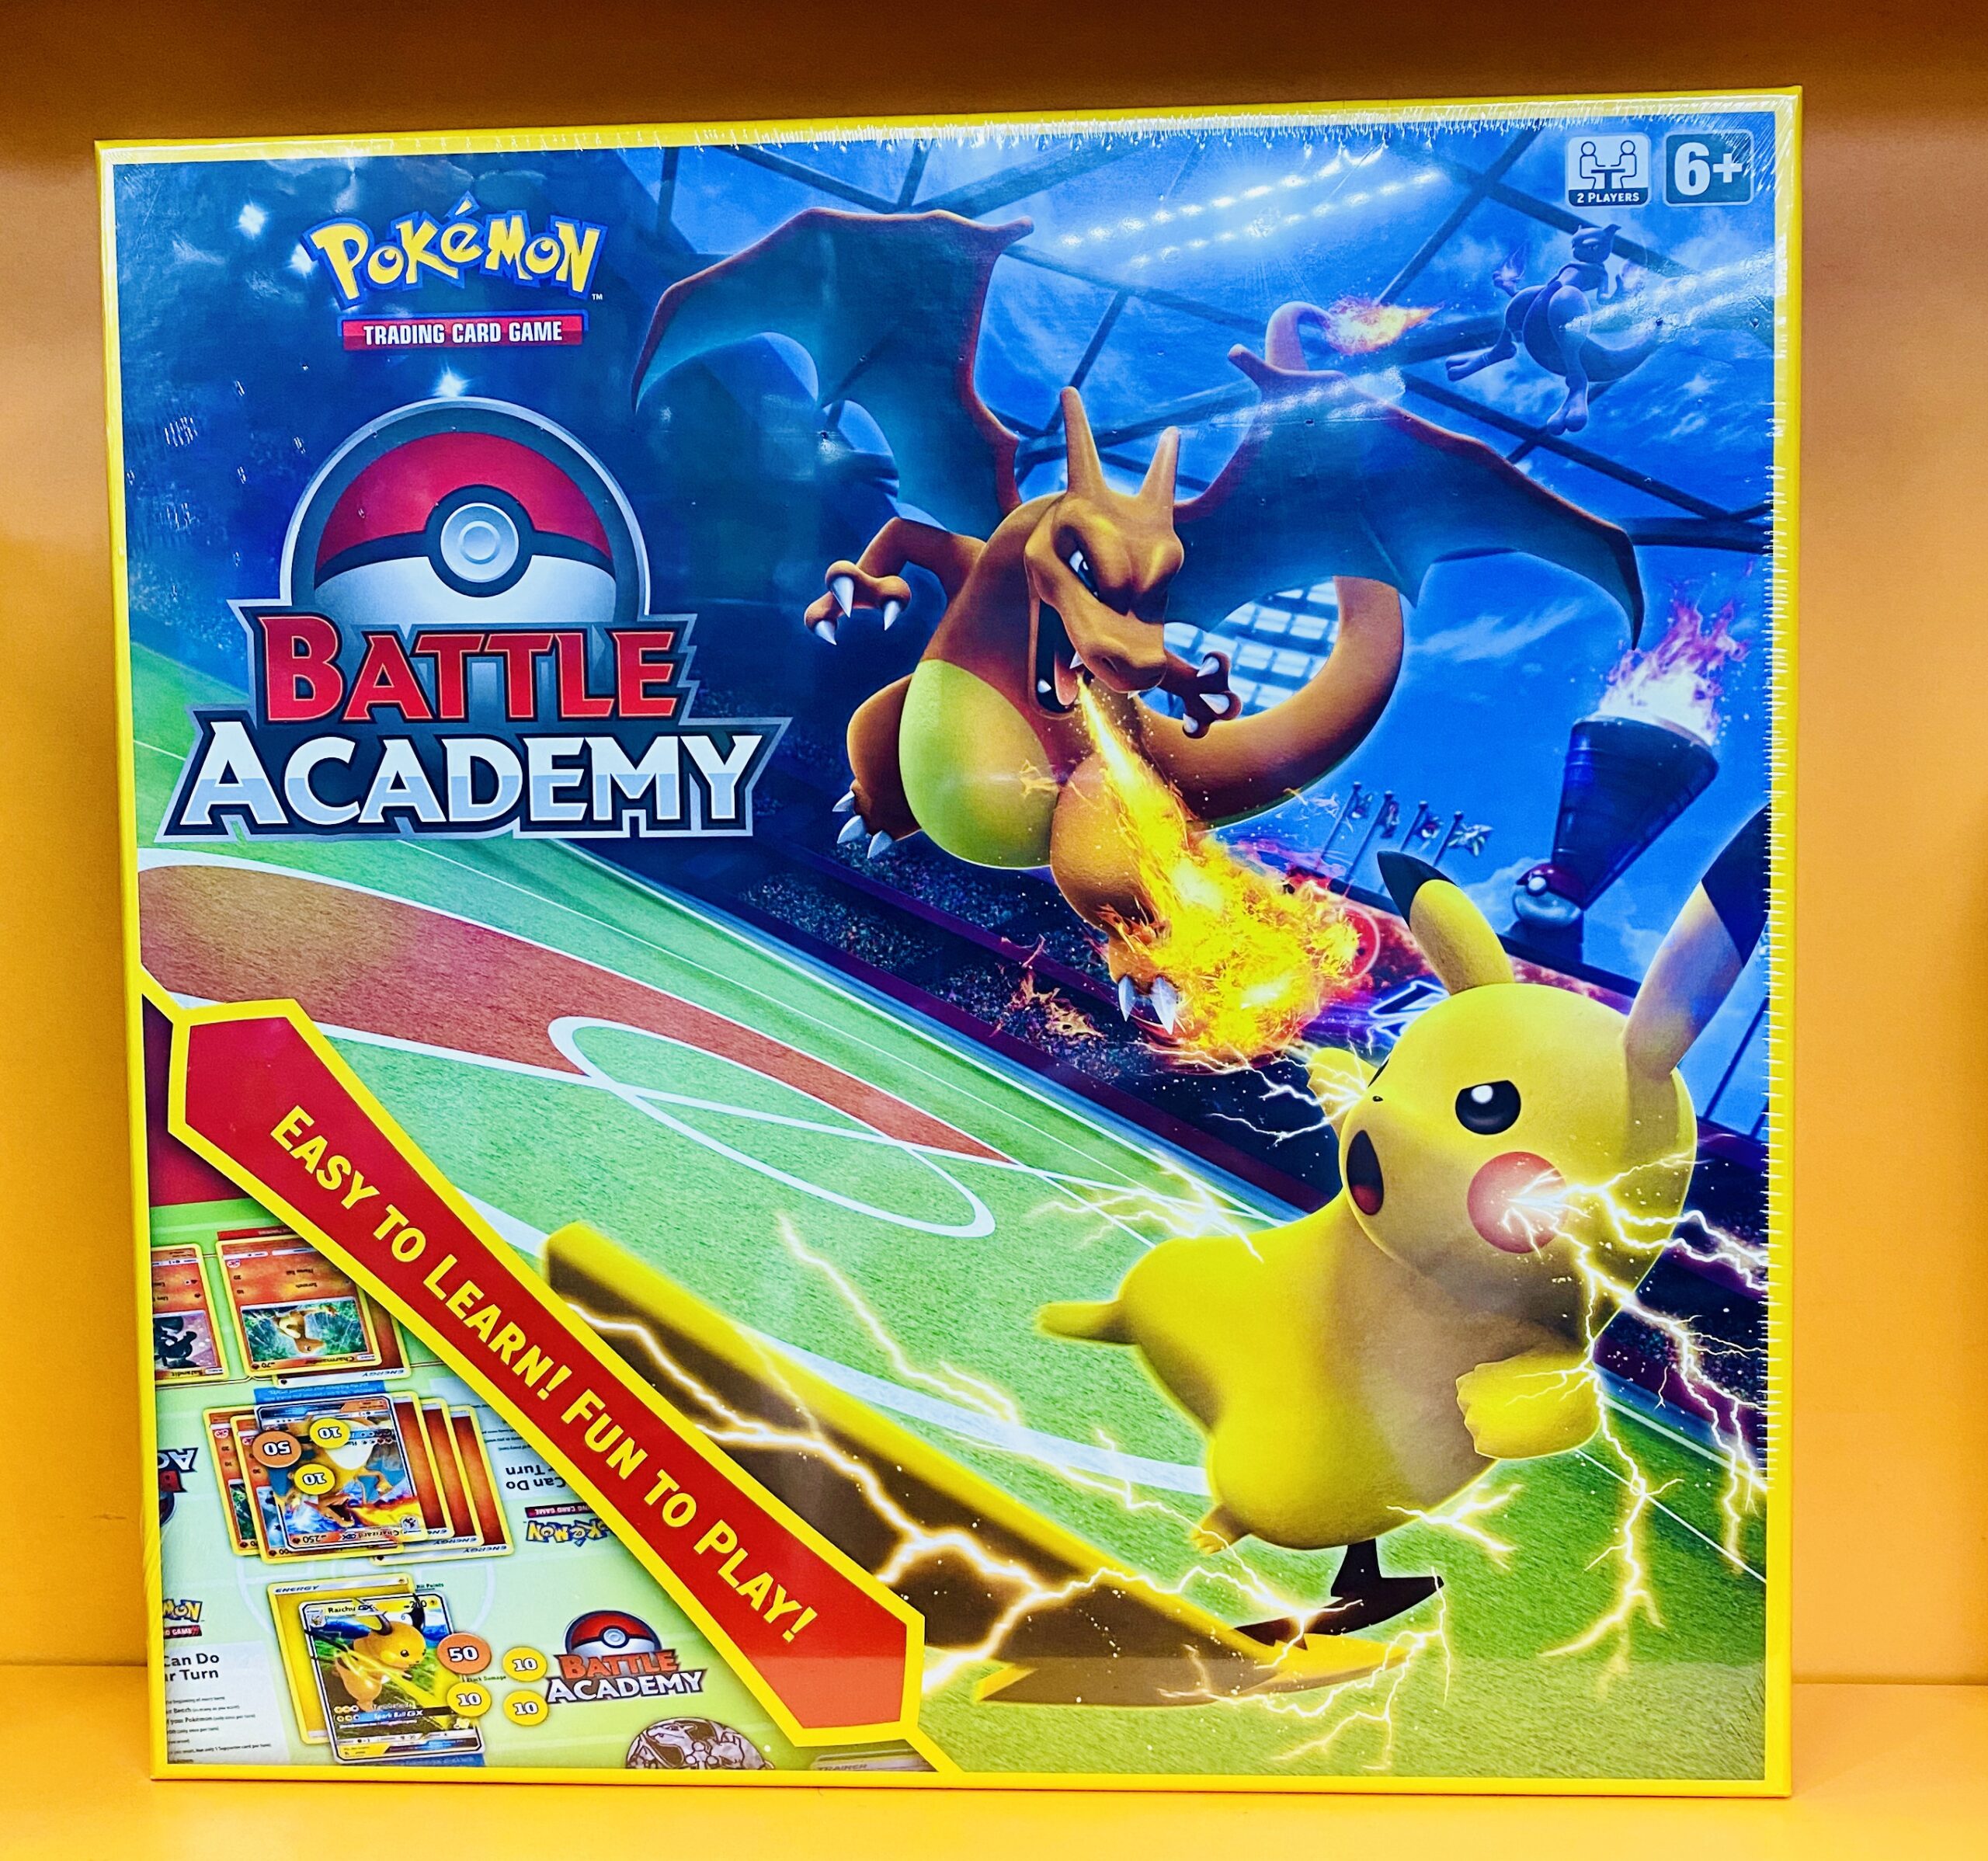 New Pokemon Trading Card Game Releases Battle Academy and Darkness